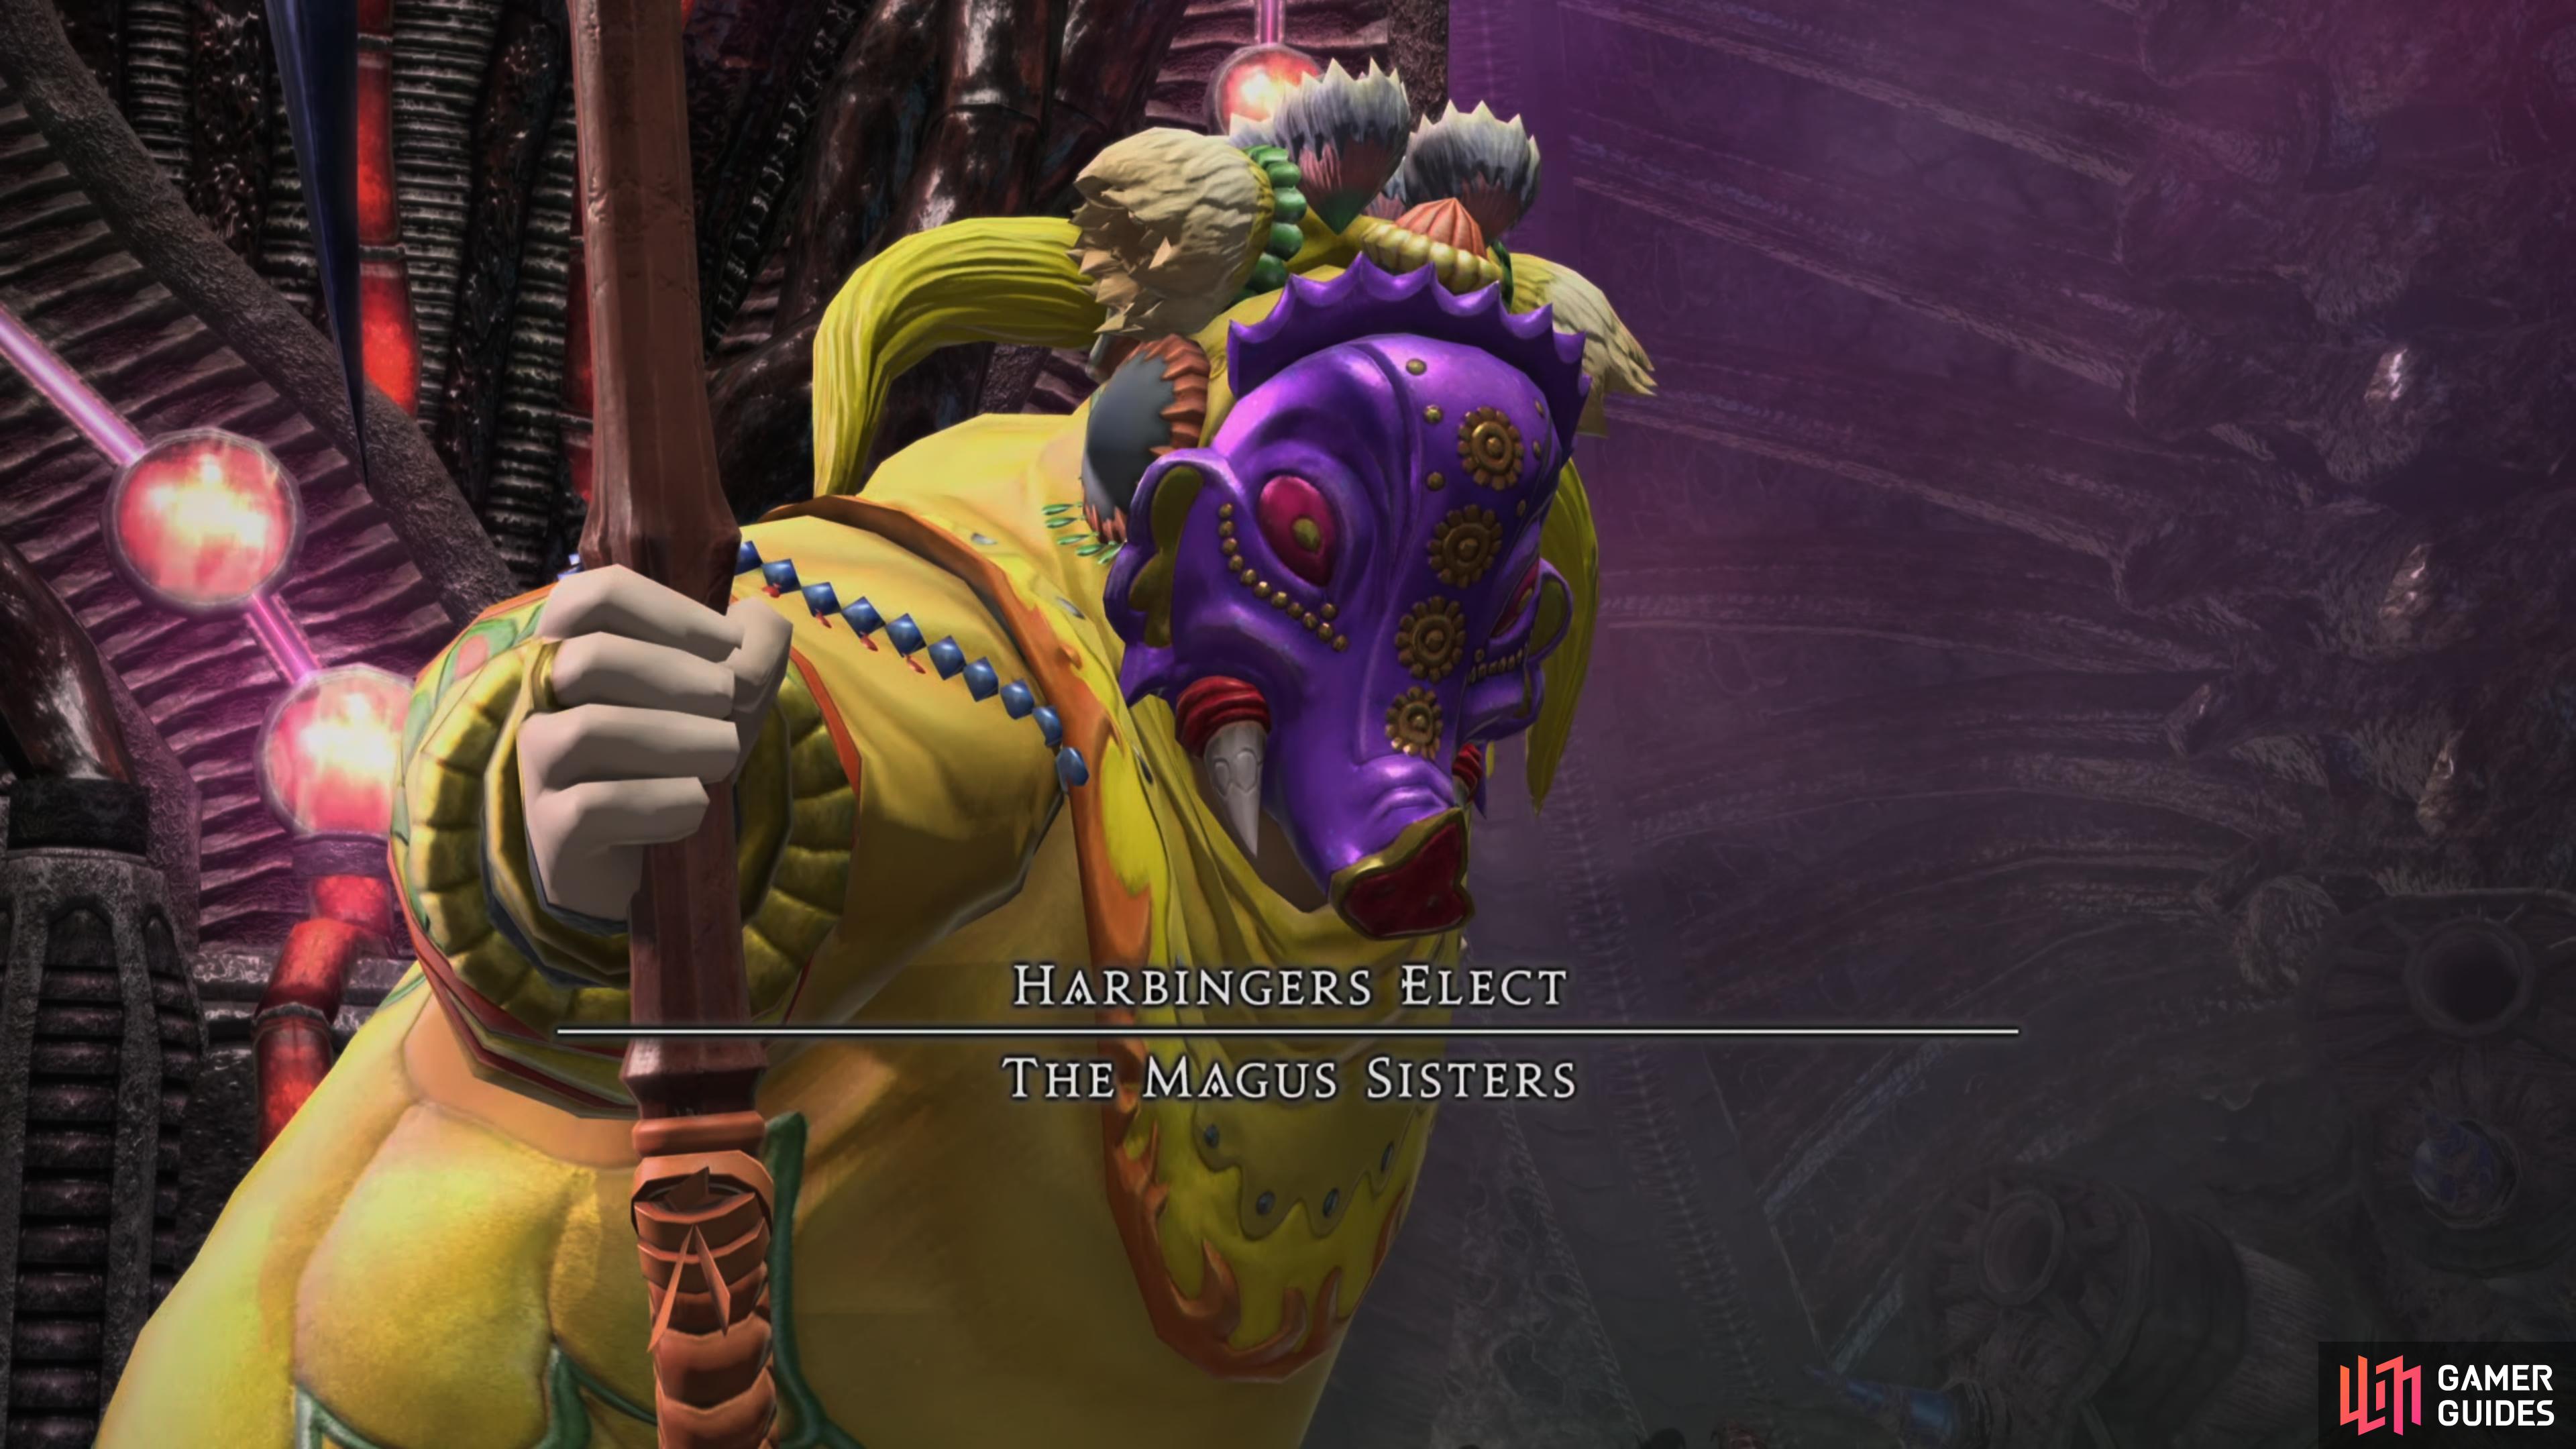 The Magus Sisters are the final boss of the Tower of Zot.